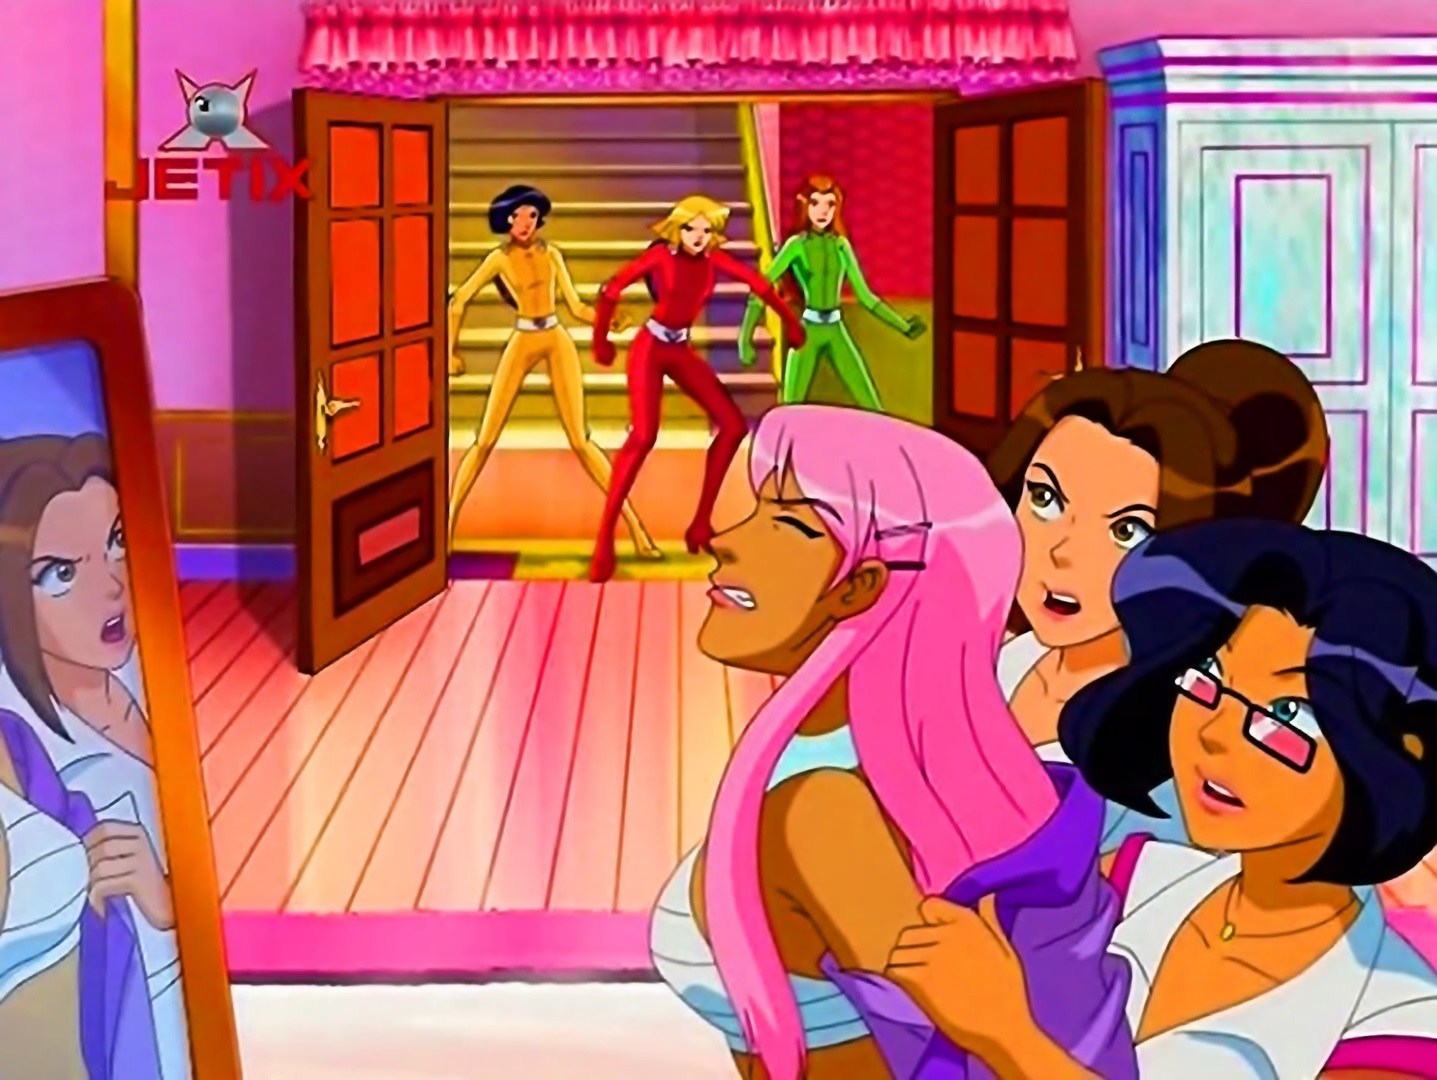 Image Milan1 Totally Spies Wiki Fandom Powered By Wikia 